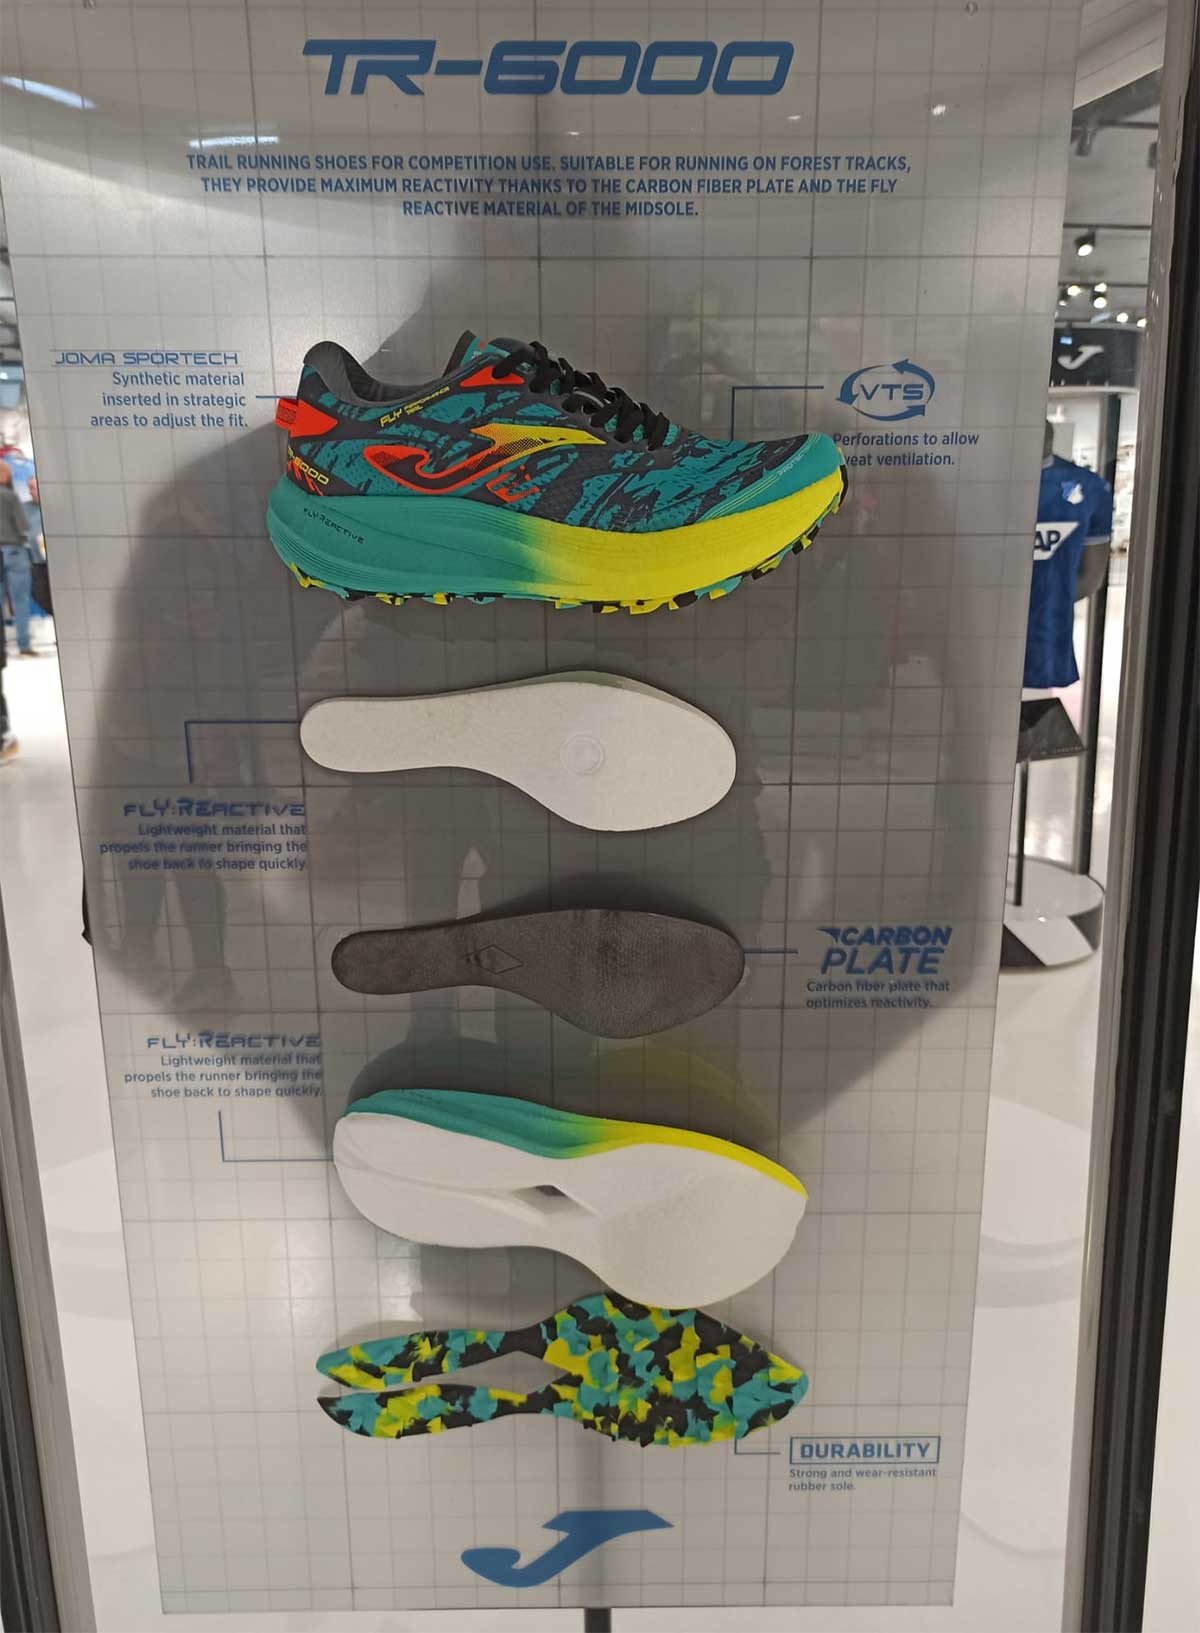 Why choose these innovative Joma TR-6000